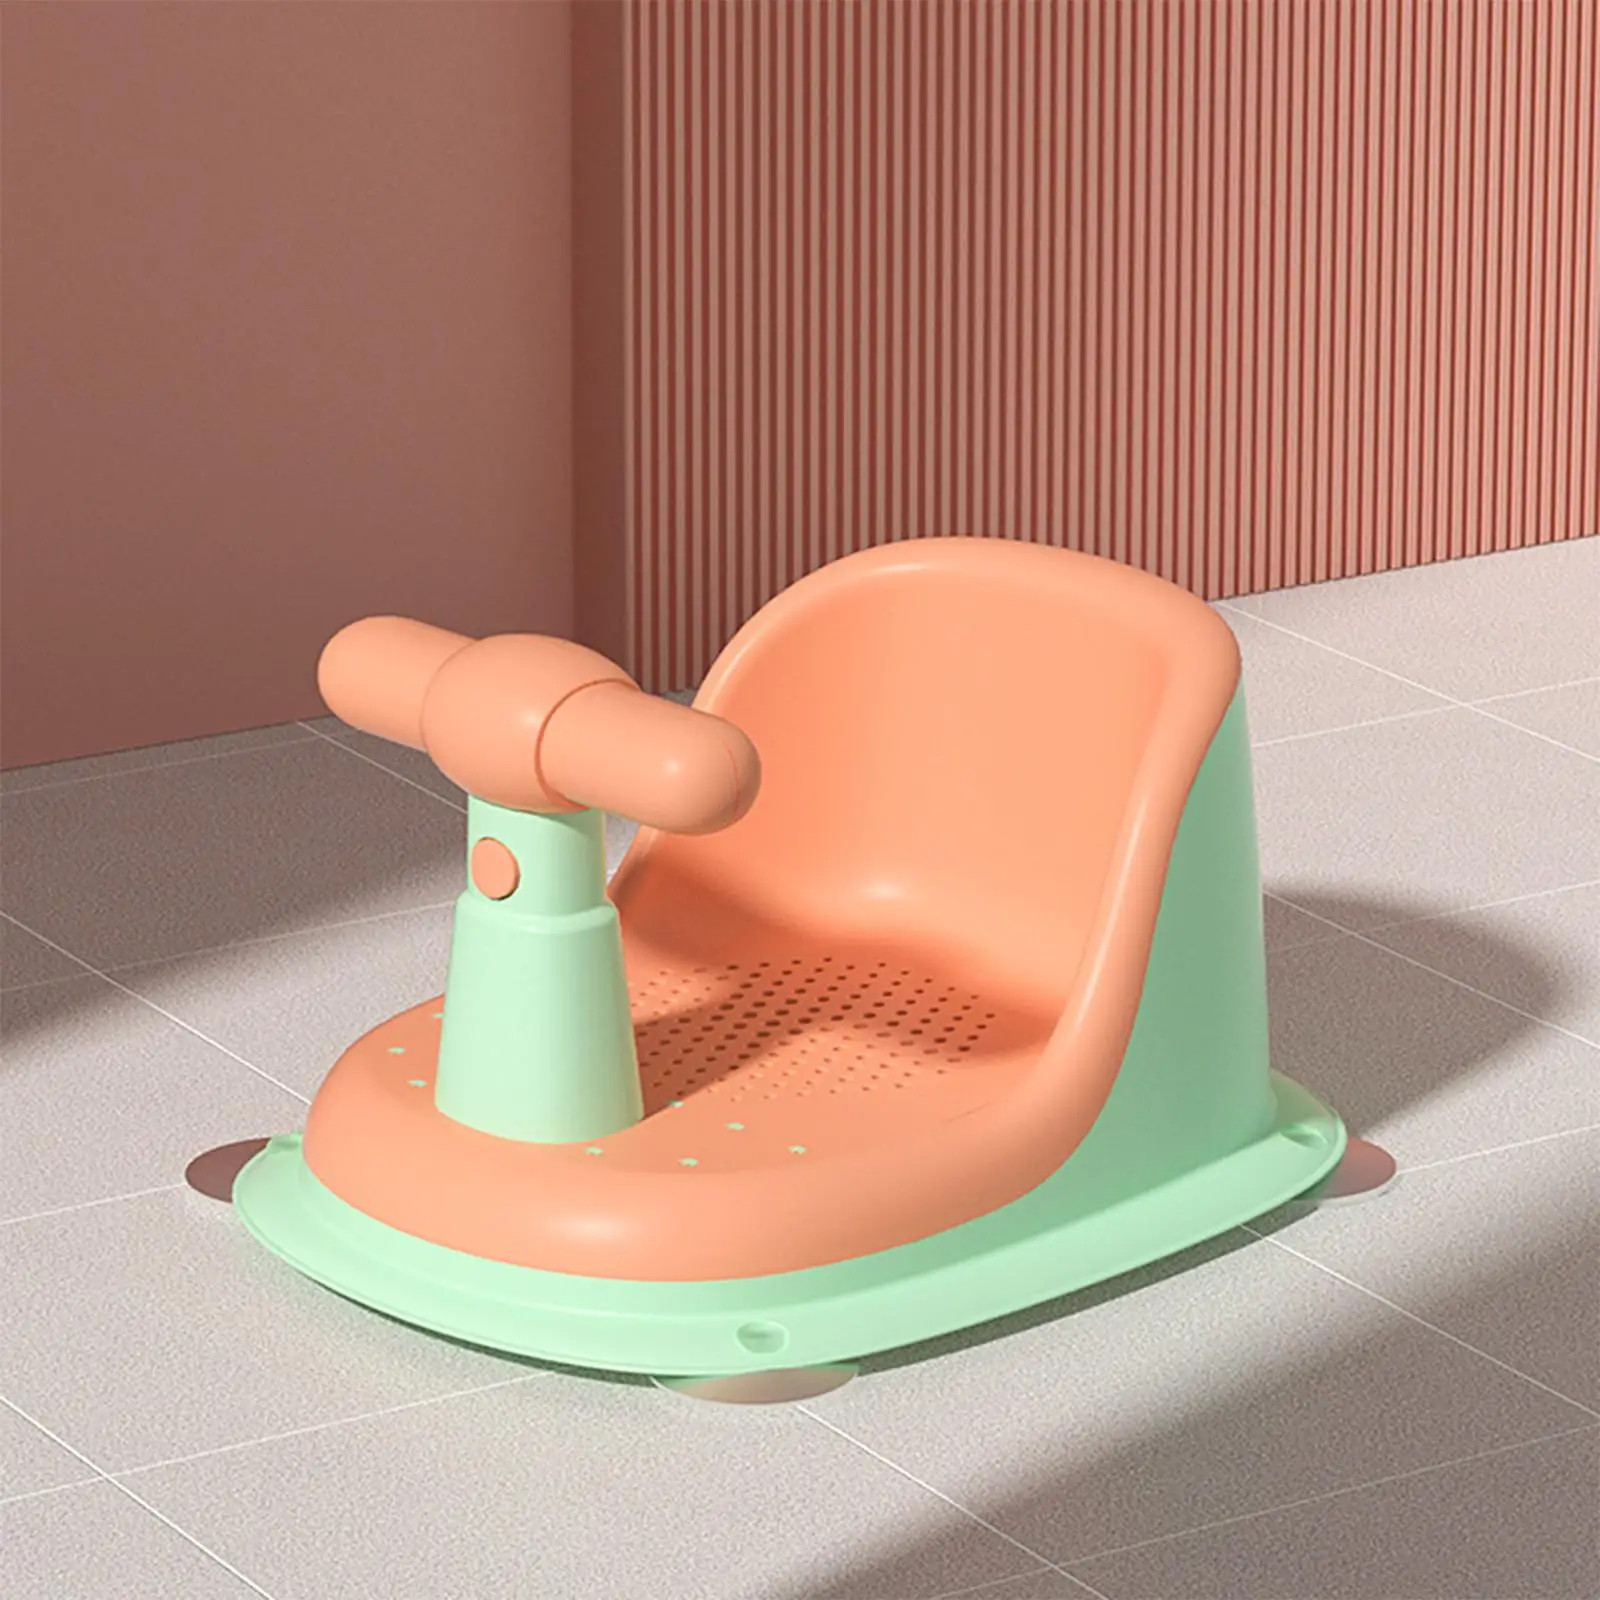 Bathroom  Tub Seat Soft Seat Pad Shower Seat, Safety Bath Seat Support for Girls kids Boys Over 6 Months